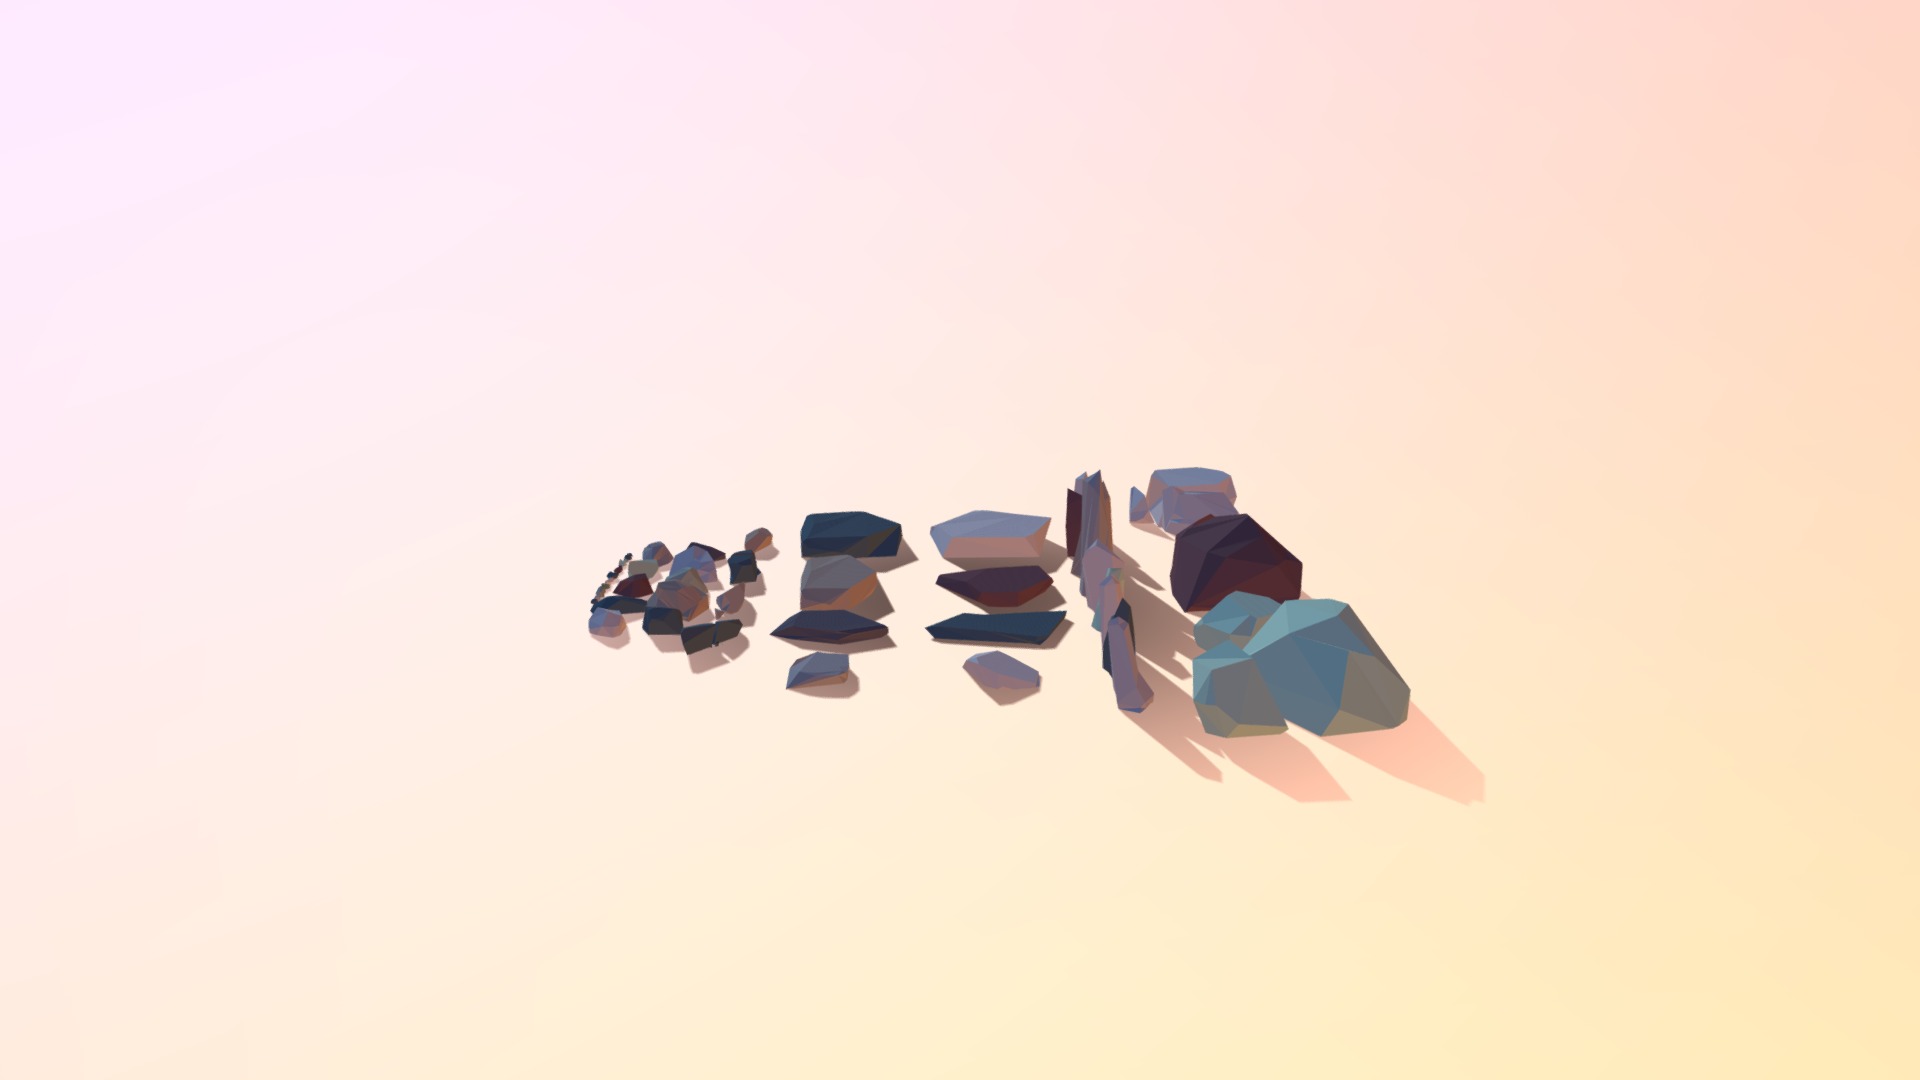 This package have 50 low poly stones! To create more variations you can scale and rotate any models 3d model